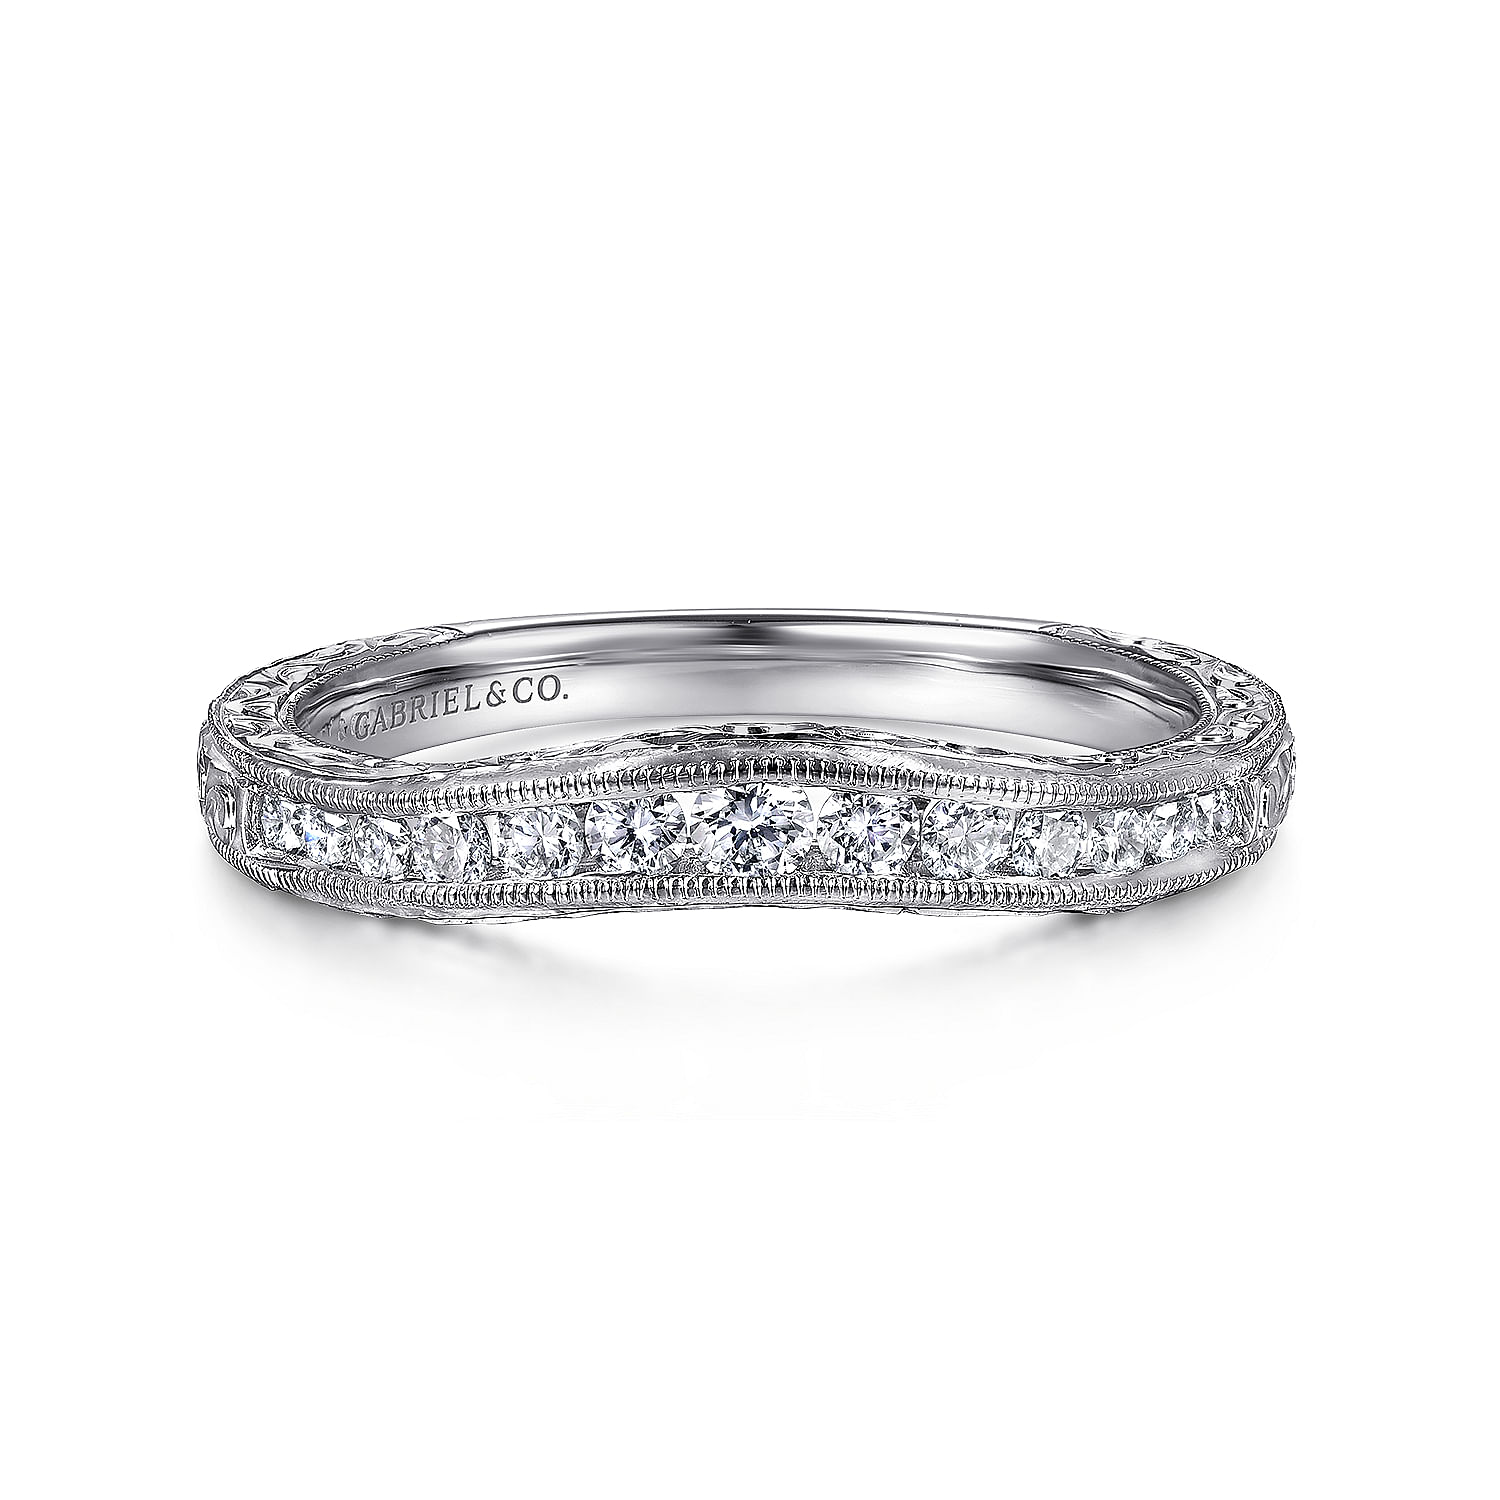 Tienne - Vintage Inspired 14K White Gold Curved Channel Set Diamond Wedding Band with Engraving